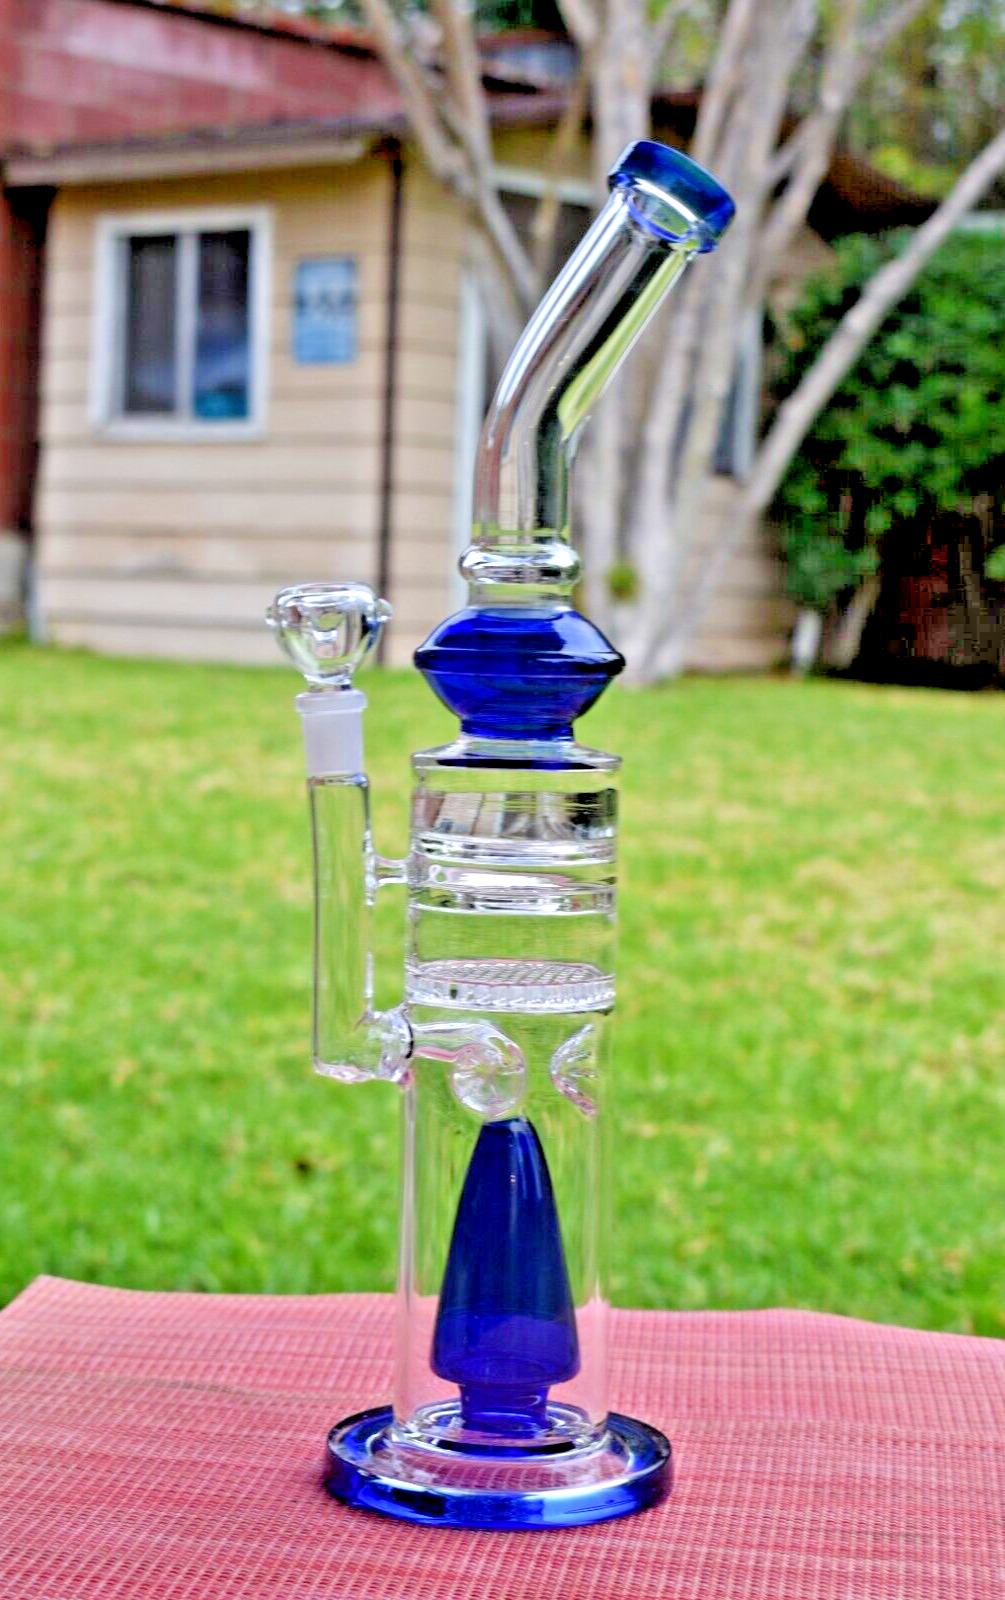 16 Inch Thick Glass Bong Water Smoking Pipe W/ Honeycomb Percolator Blue